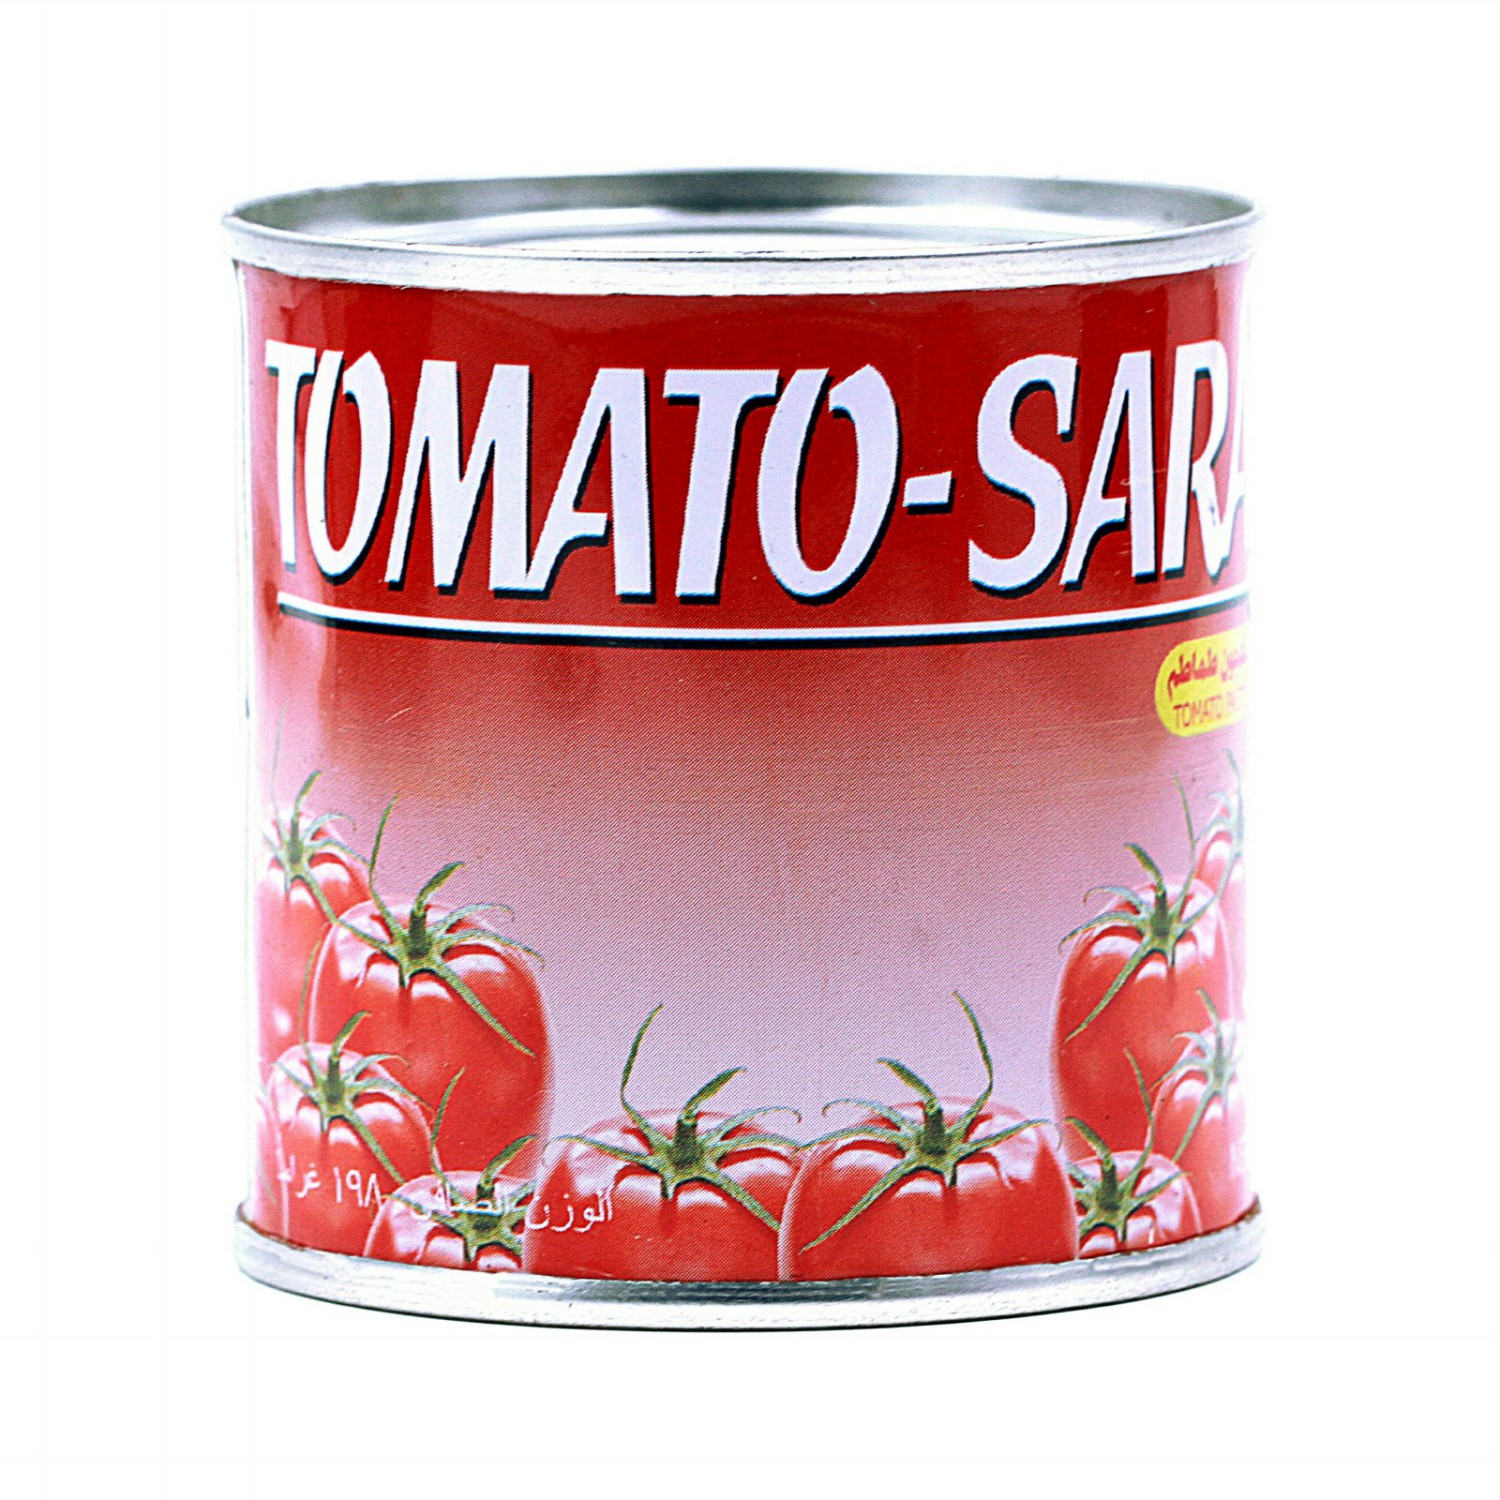 Canned tomato paste 198g